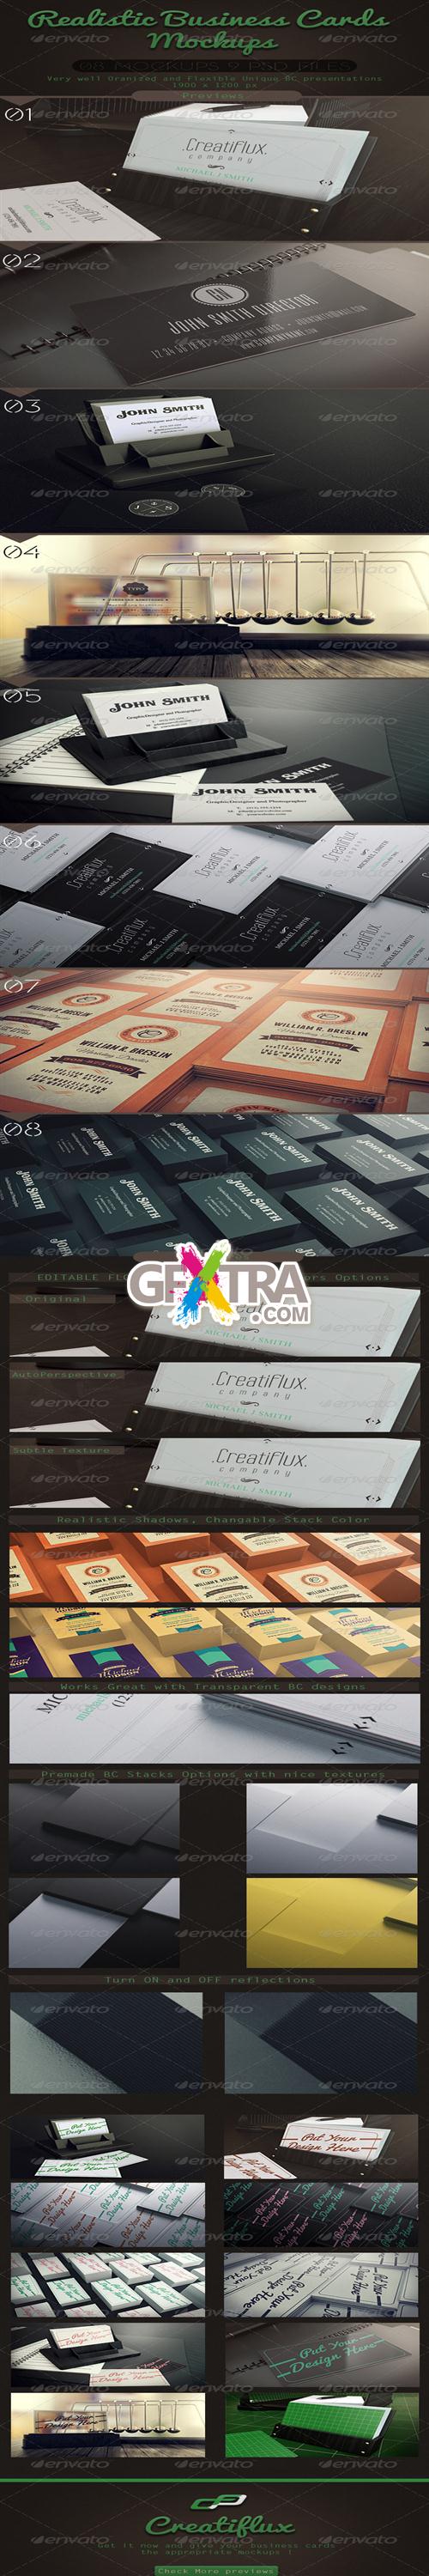 GraphicRiver - Realistic Business Cards Mockups